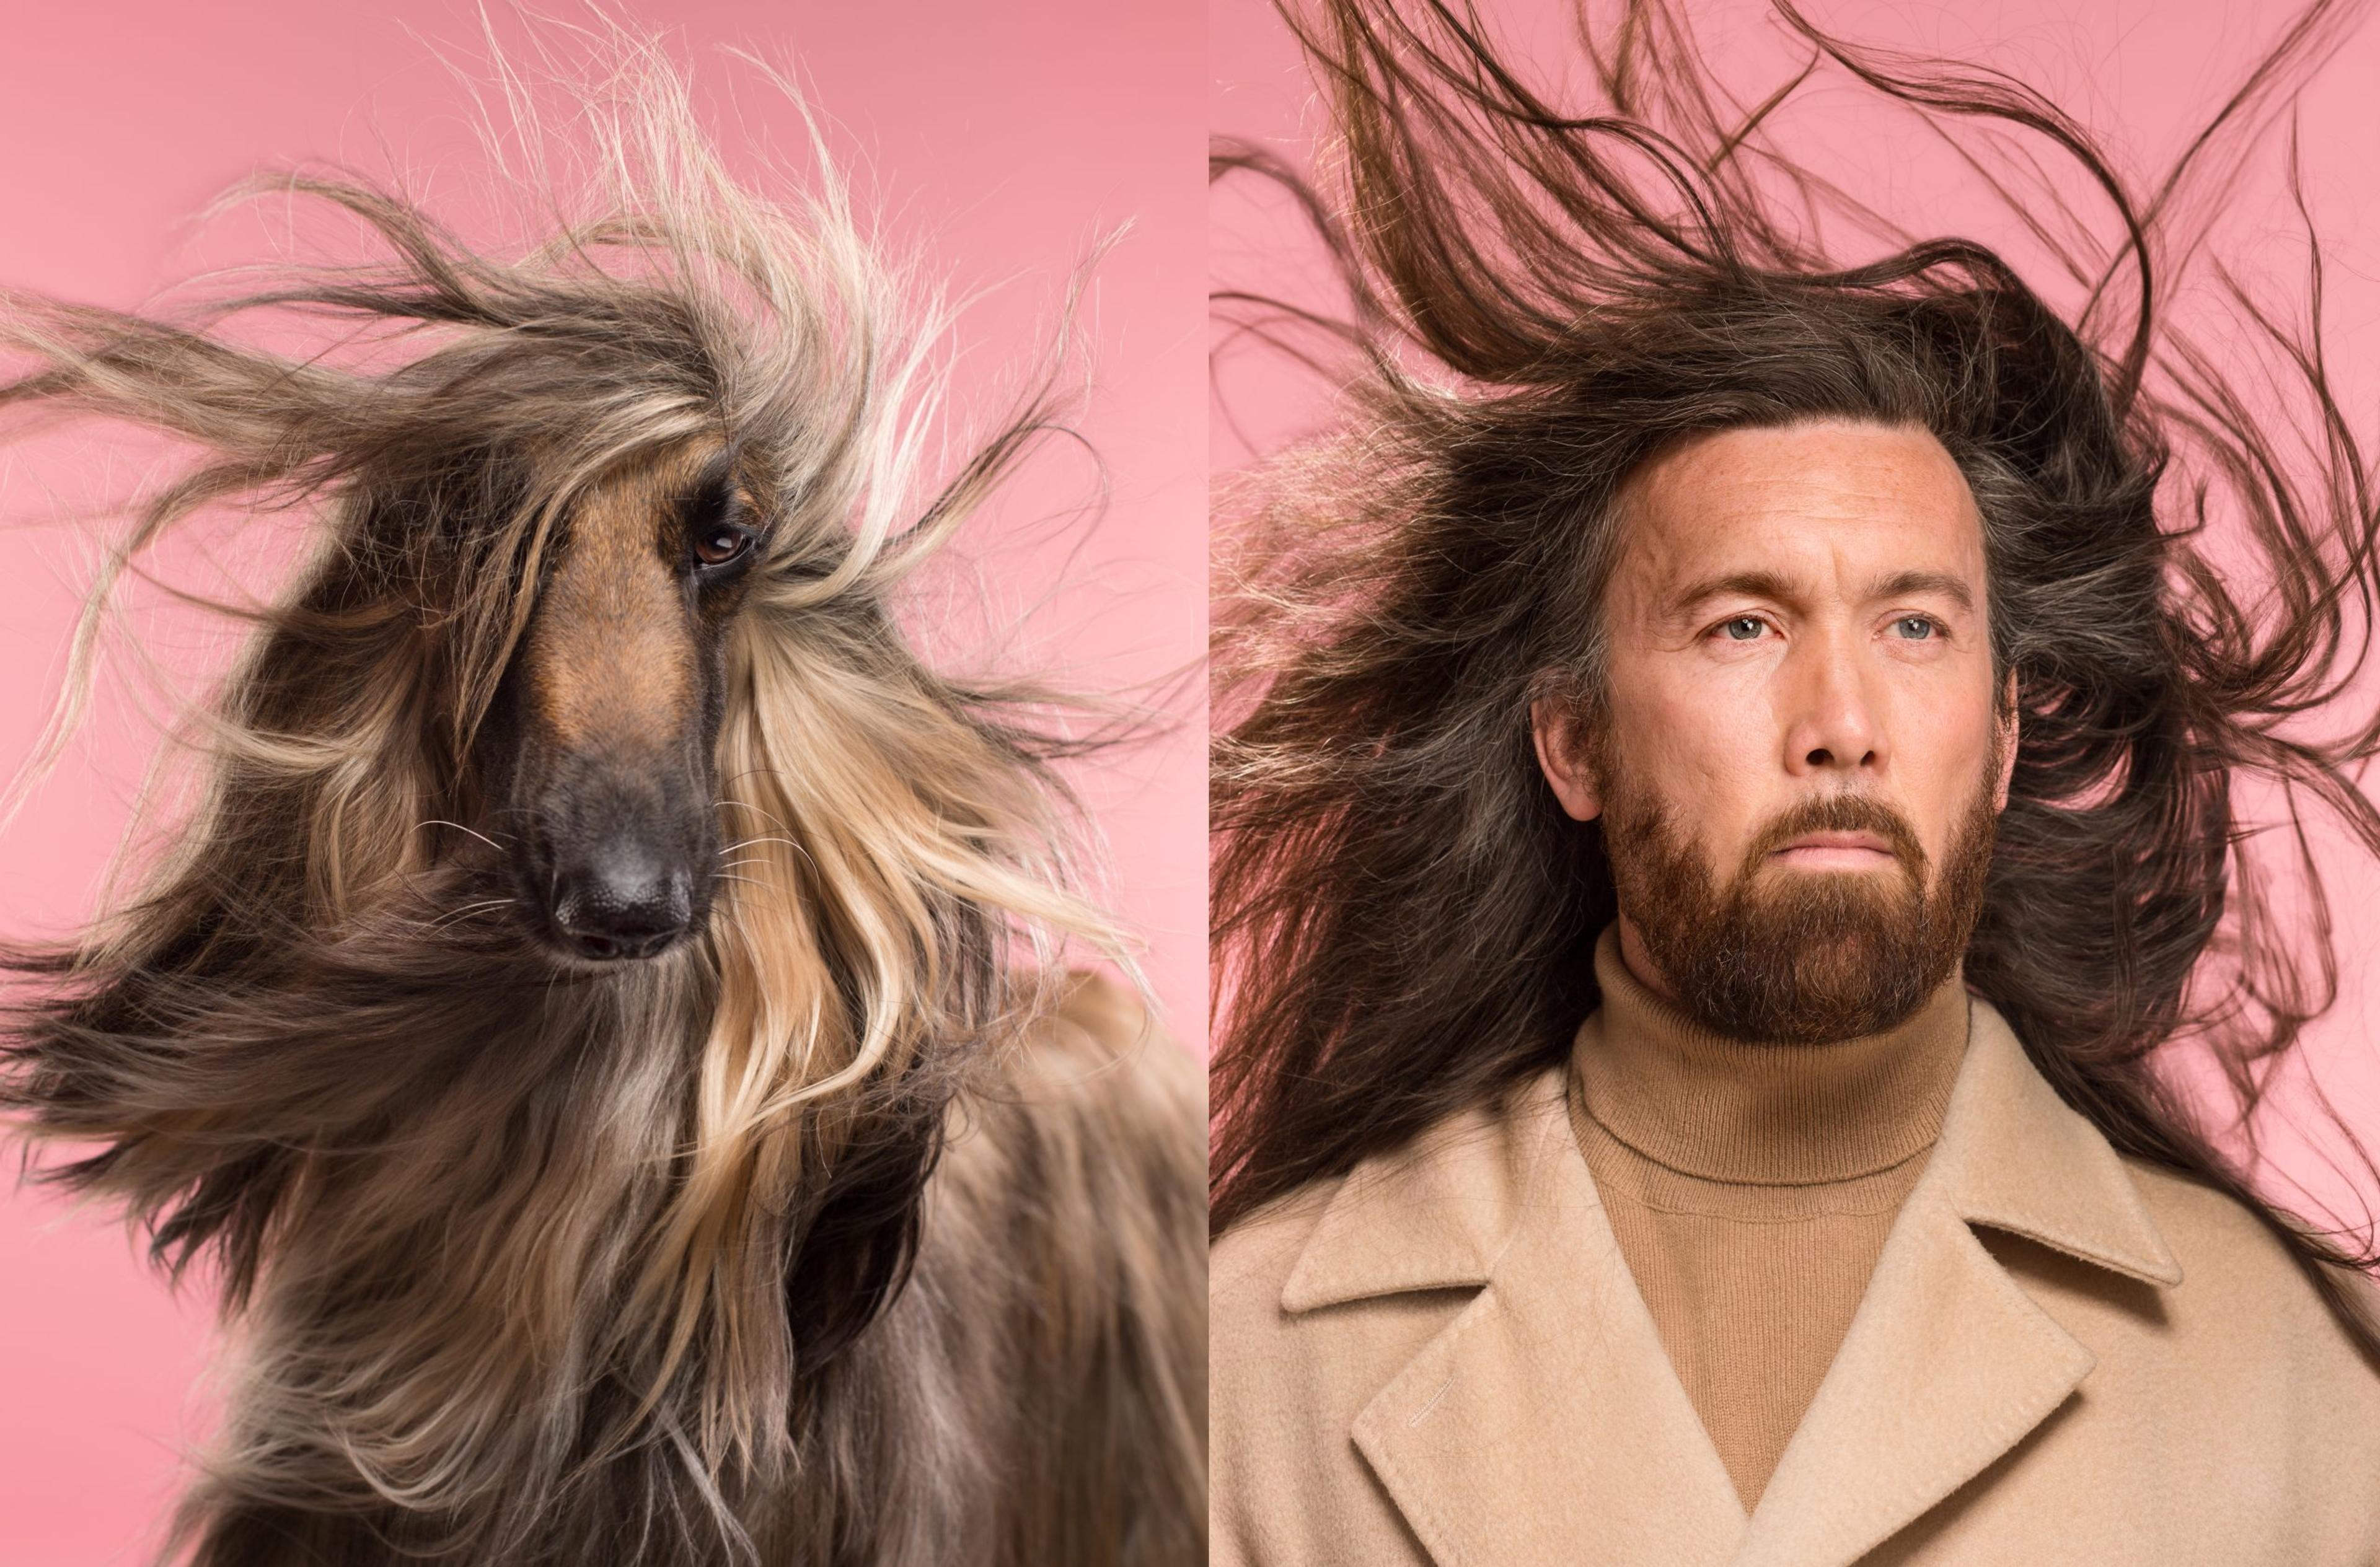 Side-by-side photographs of a dog and man, both with long hair flowing in the wind. Against a pink background.